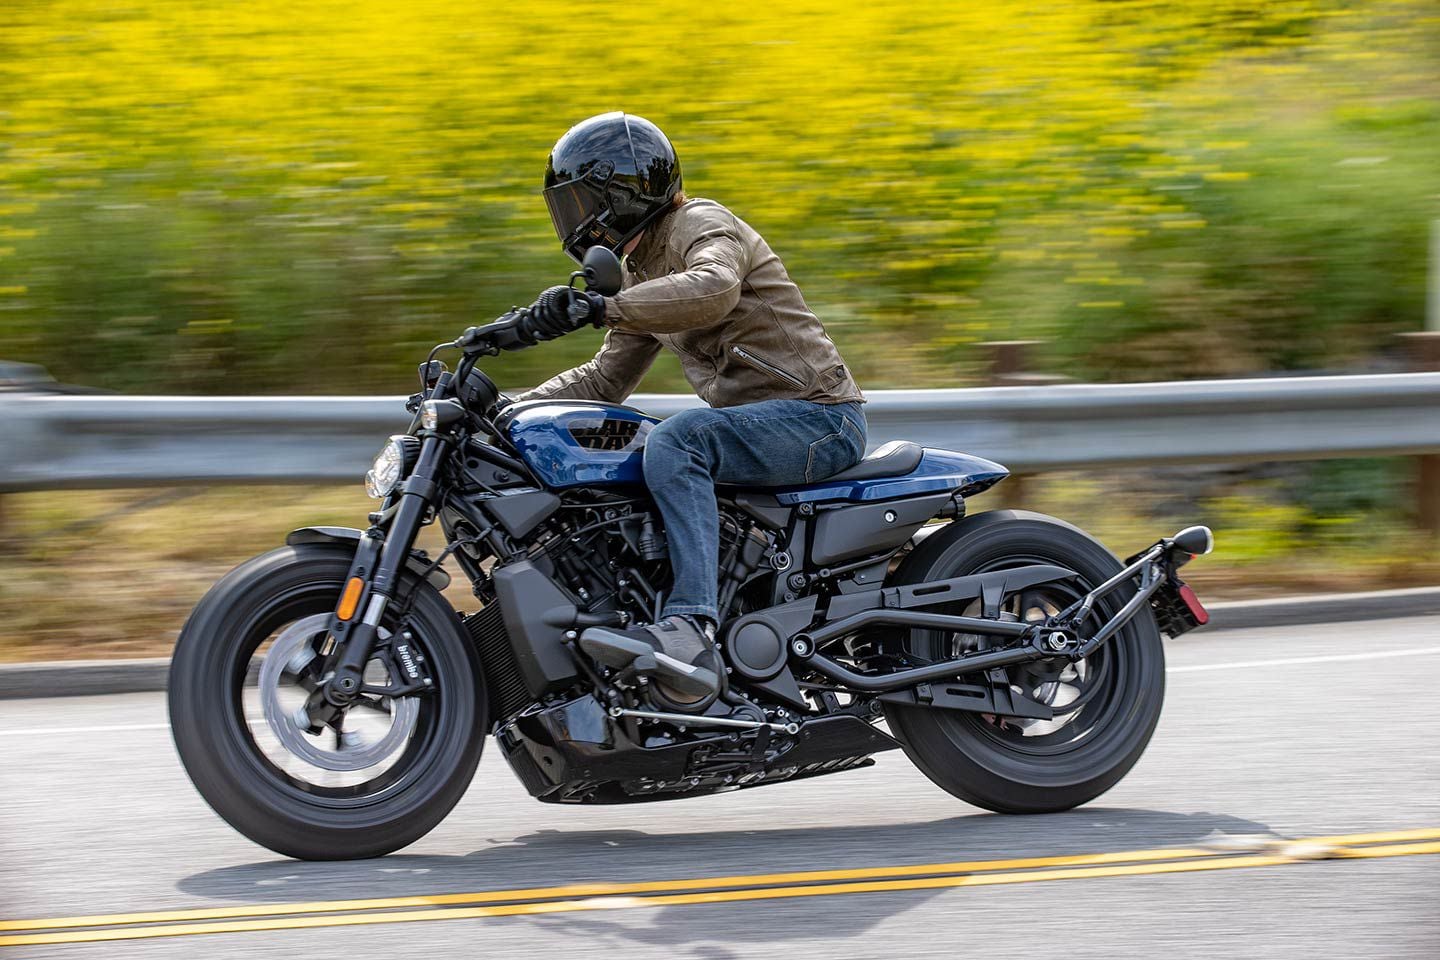 MOTORCYCLE REVIEW: The Lowdown on the New Sportster 1200L - Women